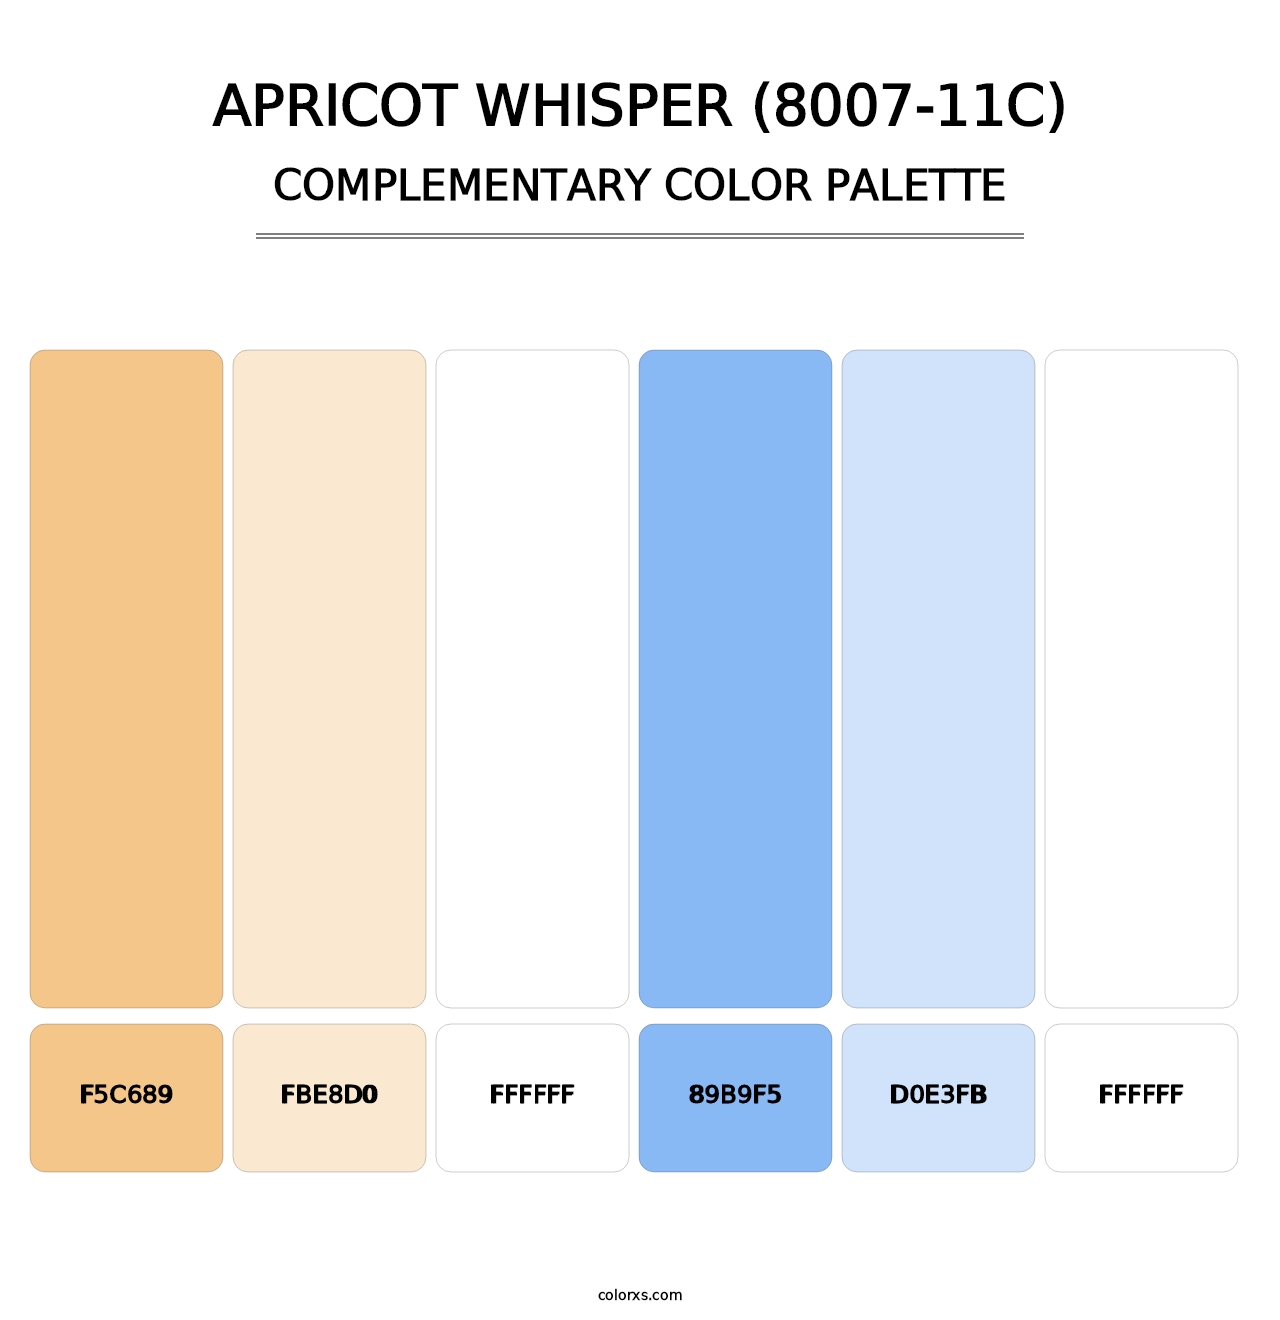 Apricot Whisper (8007-11C) - Complementary Color Palette